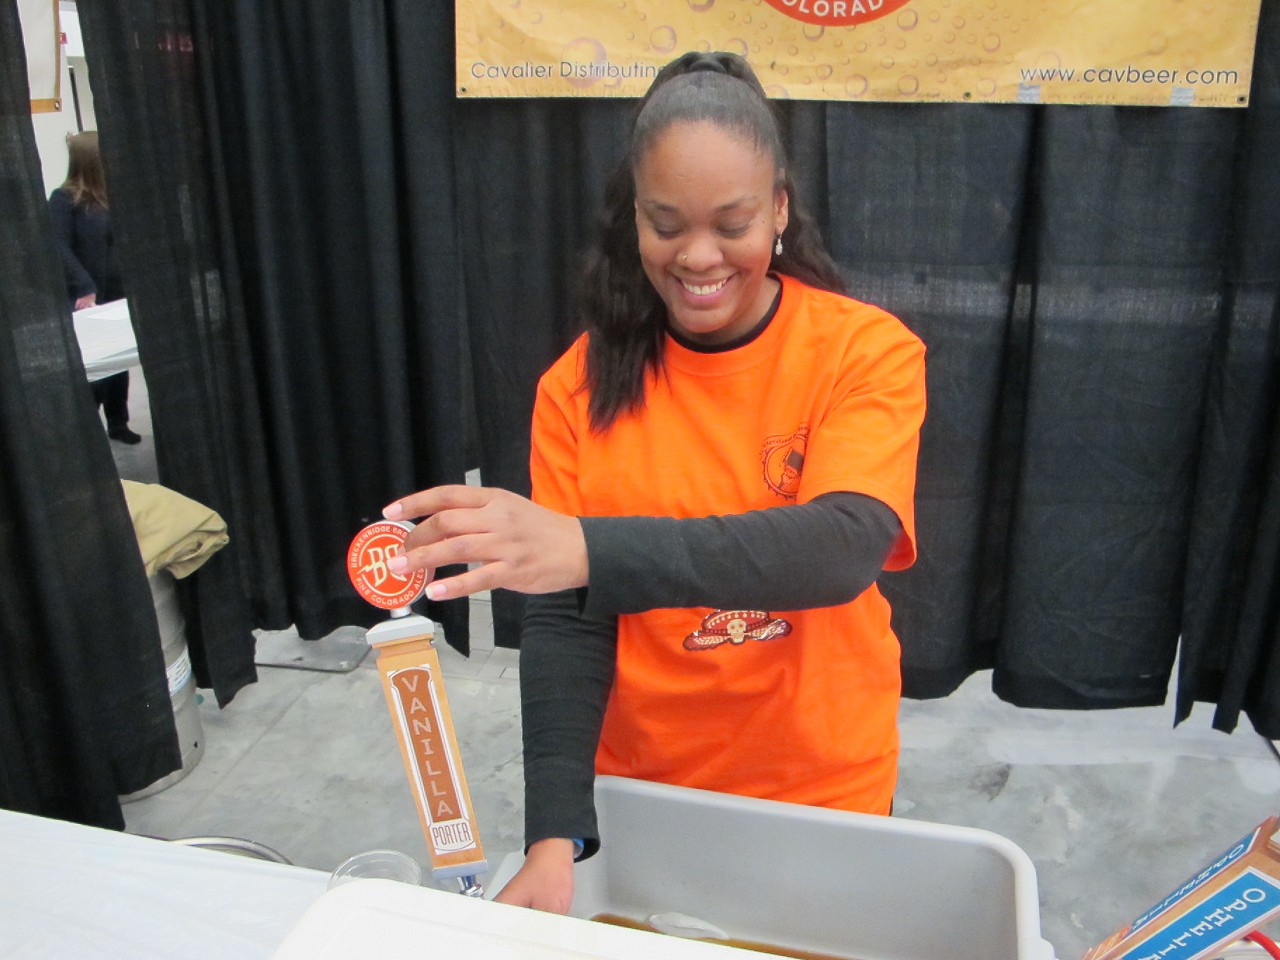 Photos from last night's Cleveland Beerfest at the Convention Center